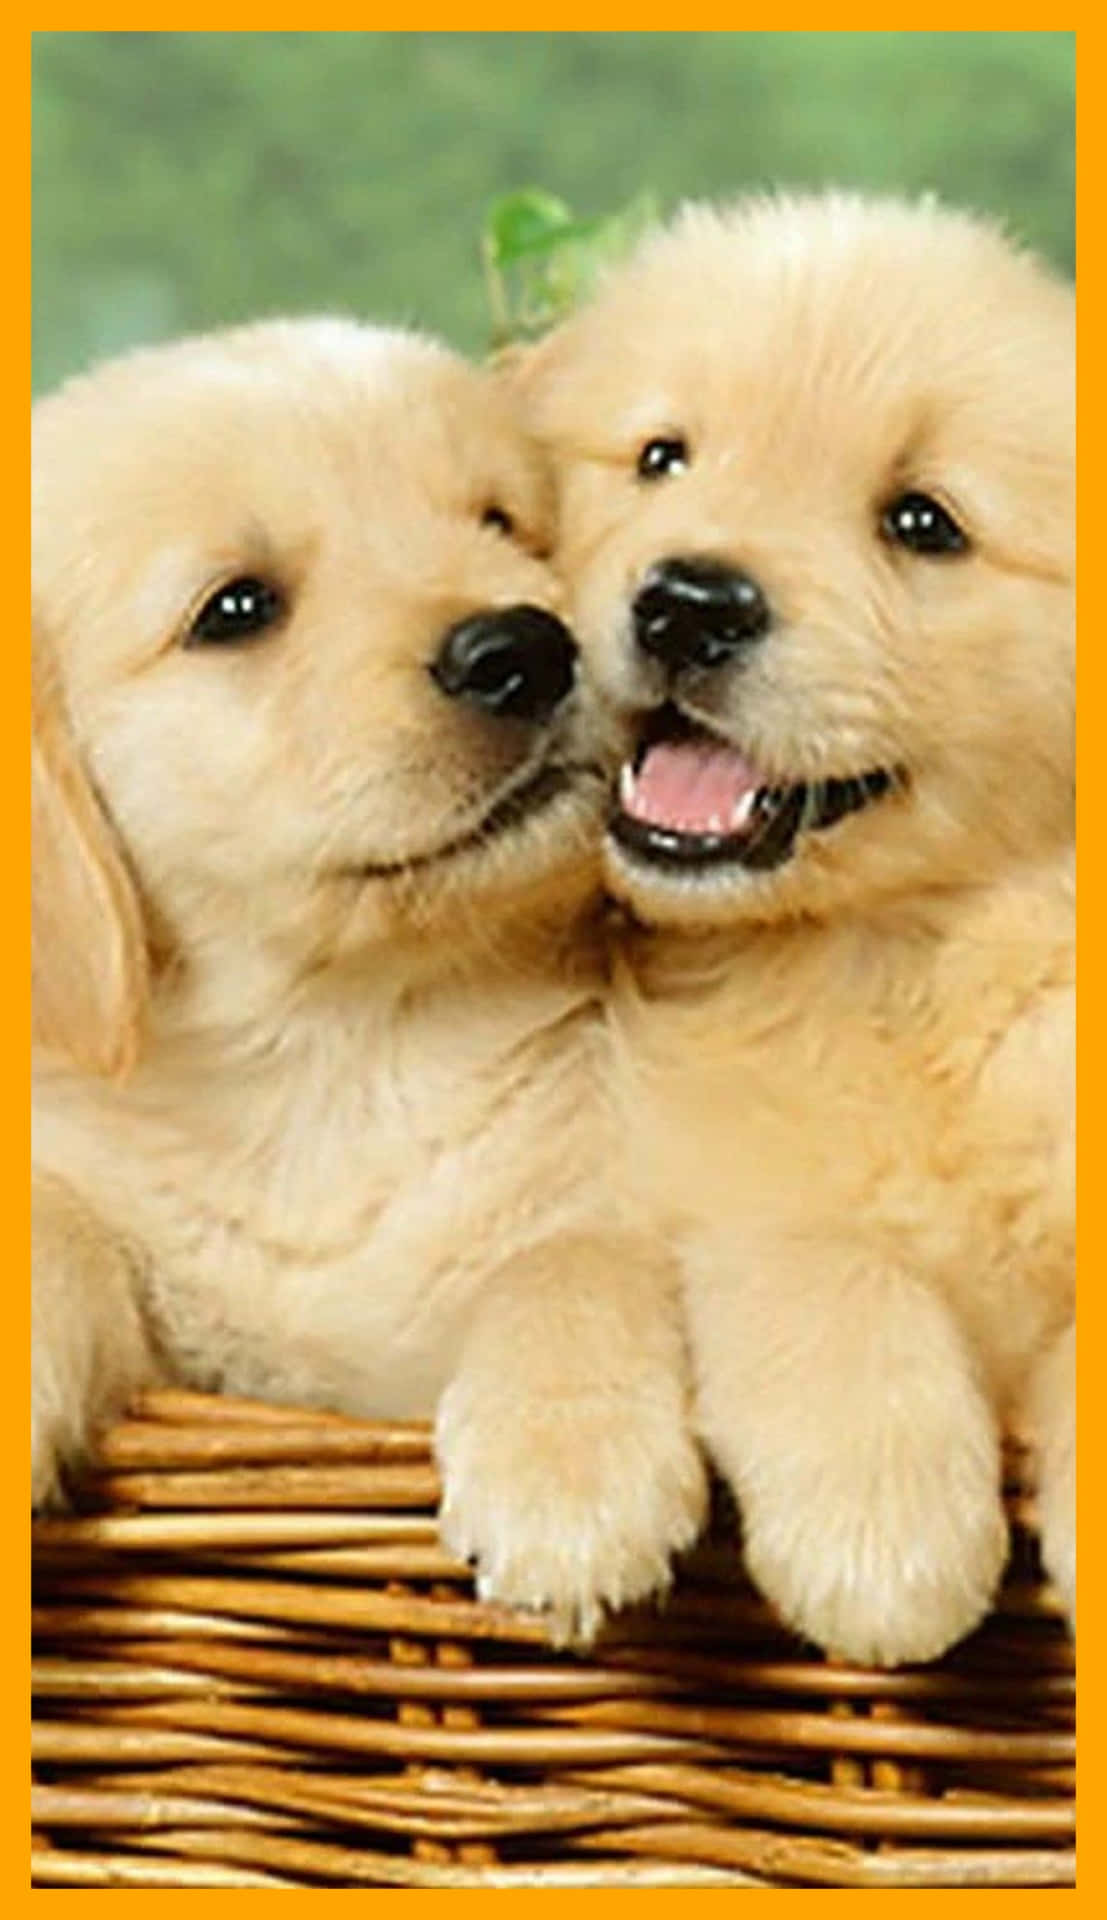 "A warm and fuzzy feeling from these two aesthetic pups" Wallpaper